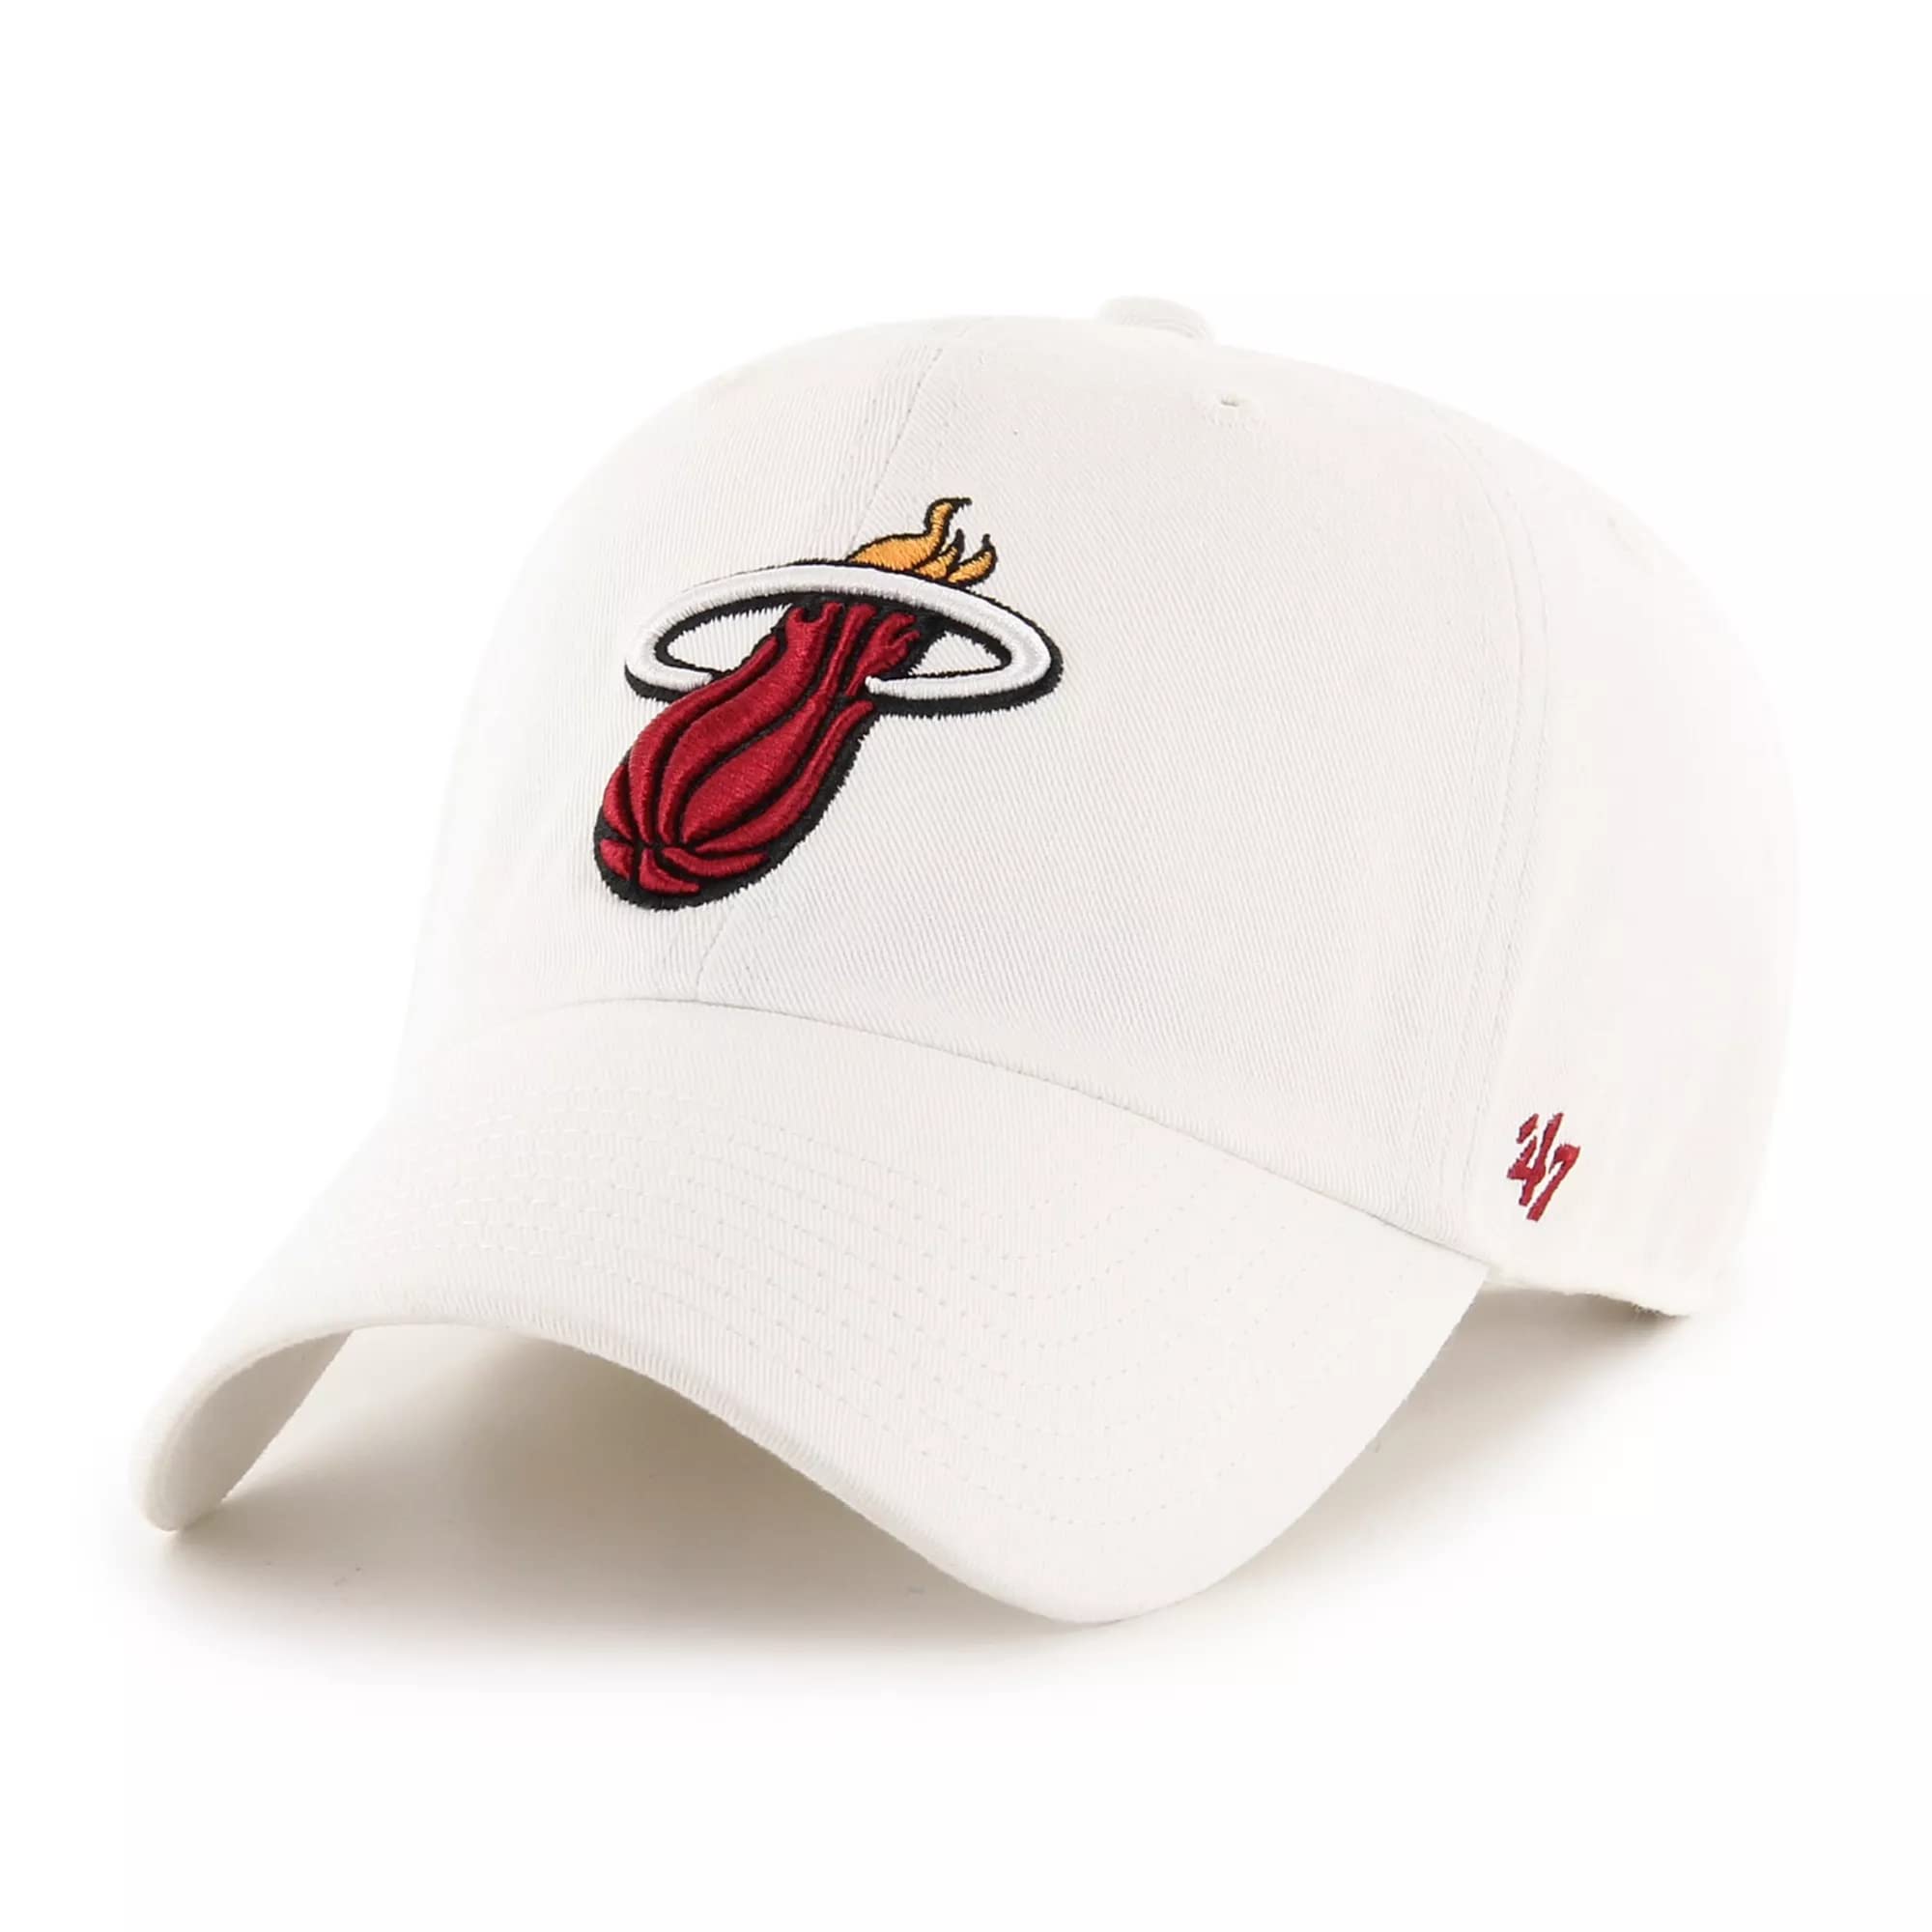 '47 NBA Unisex-Adult Clean Up Adjustable Hat Cap One Size Fits All (Miami Heat White) - Caps Fitted Caps Fitted 47